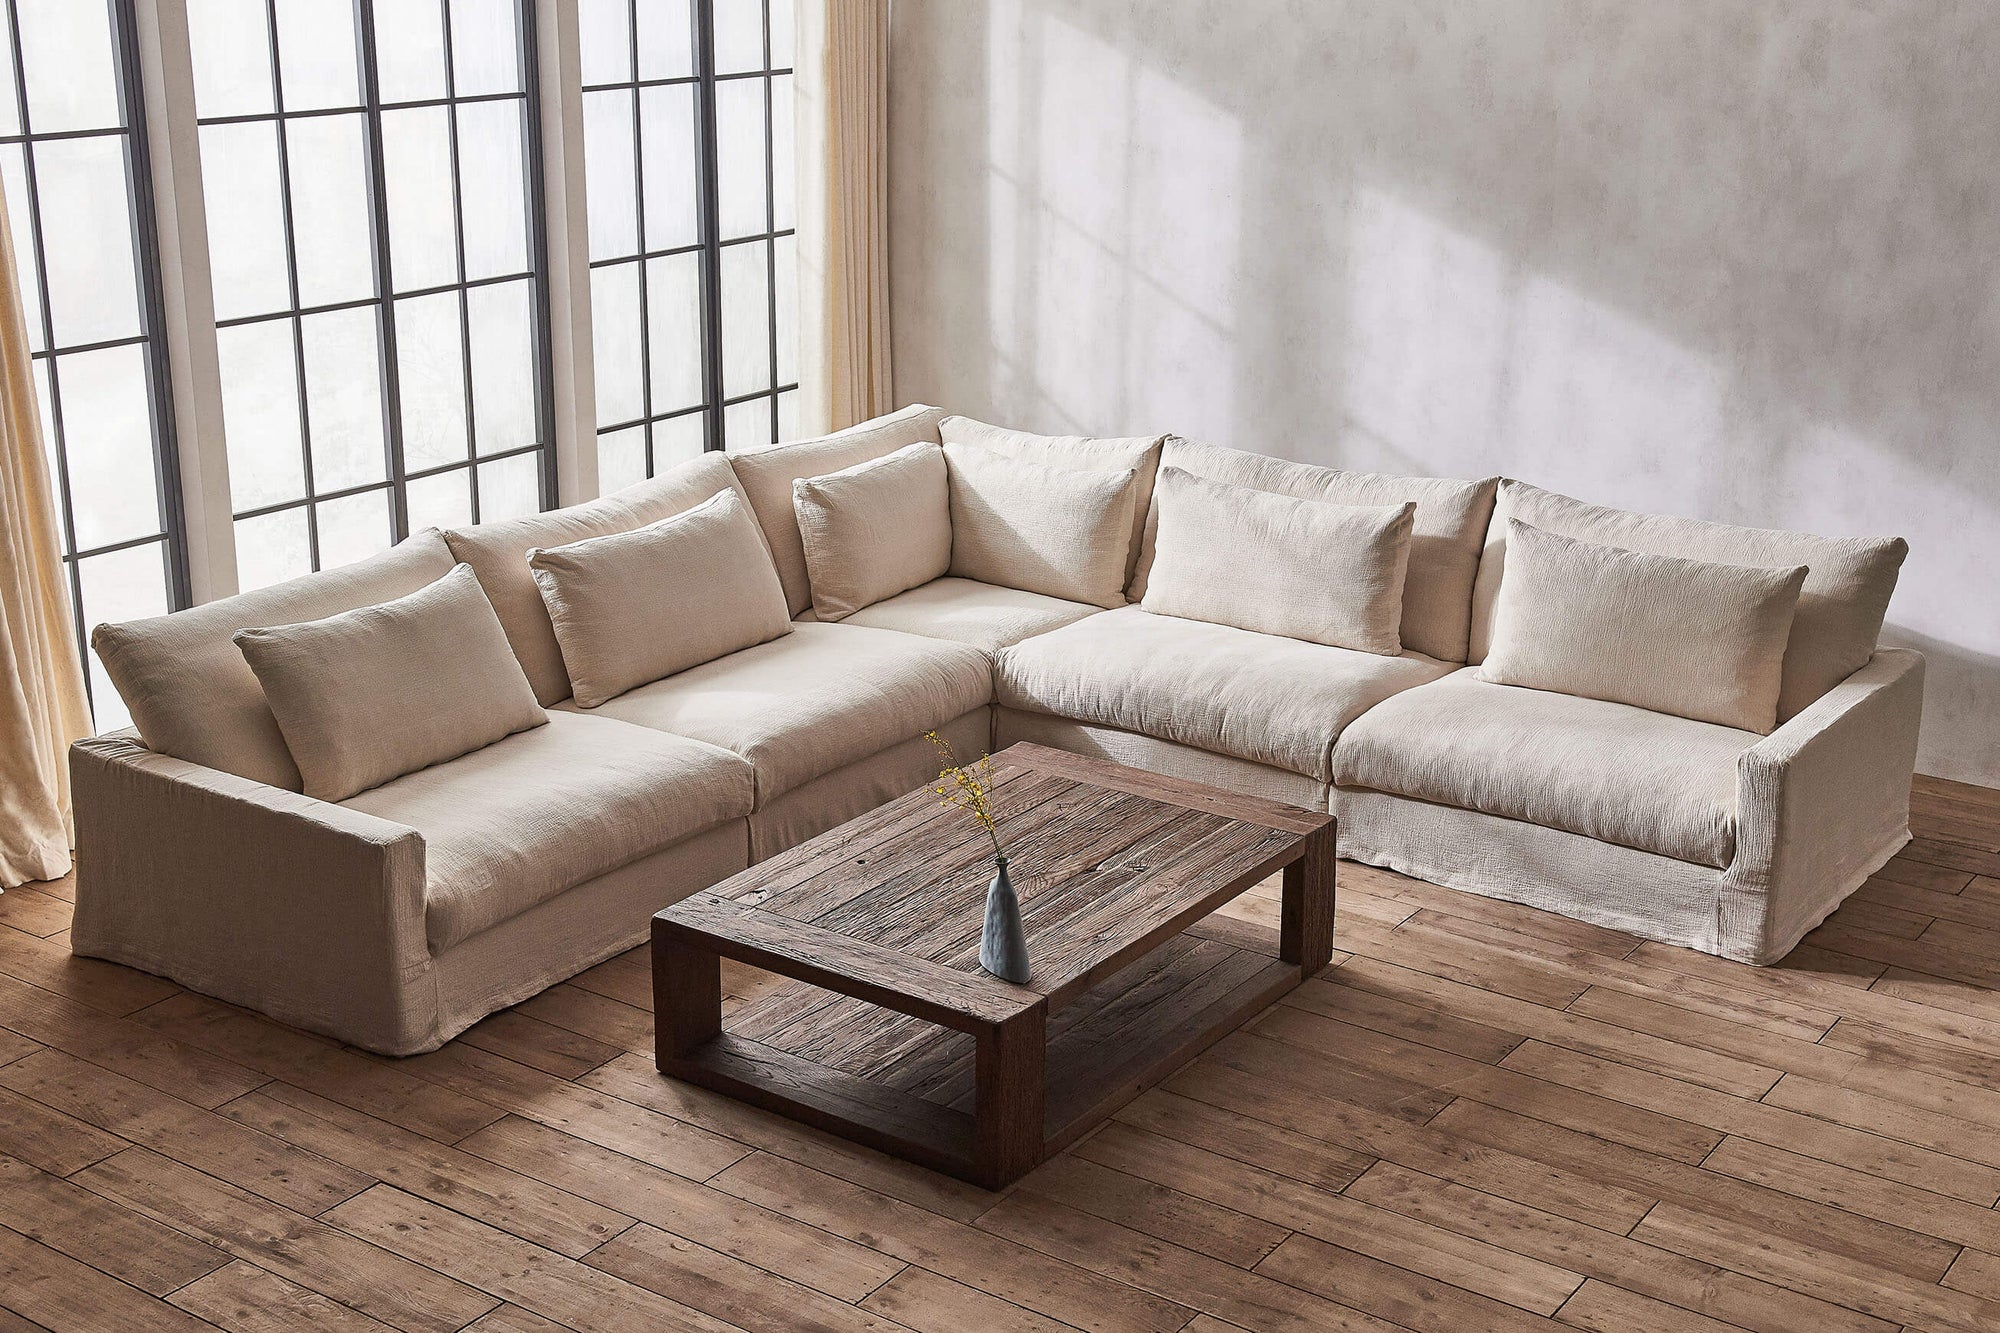 Devyn Corner Sectional Sofa in Corn Silk, a light beige Washed Cotton Linen, plaved in front of a large window with a wooden coffee table